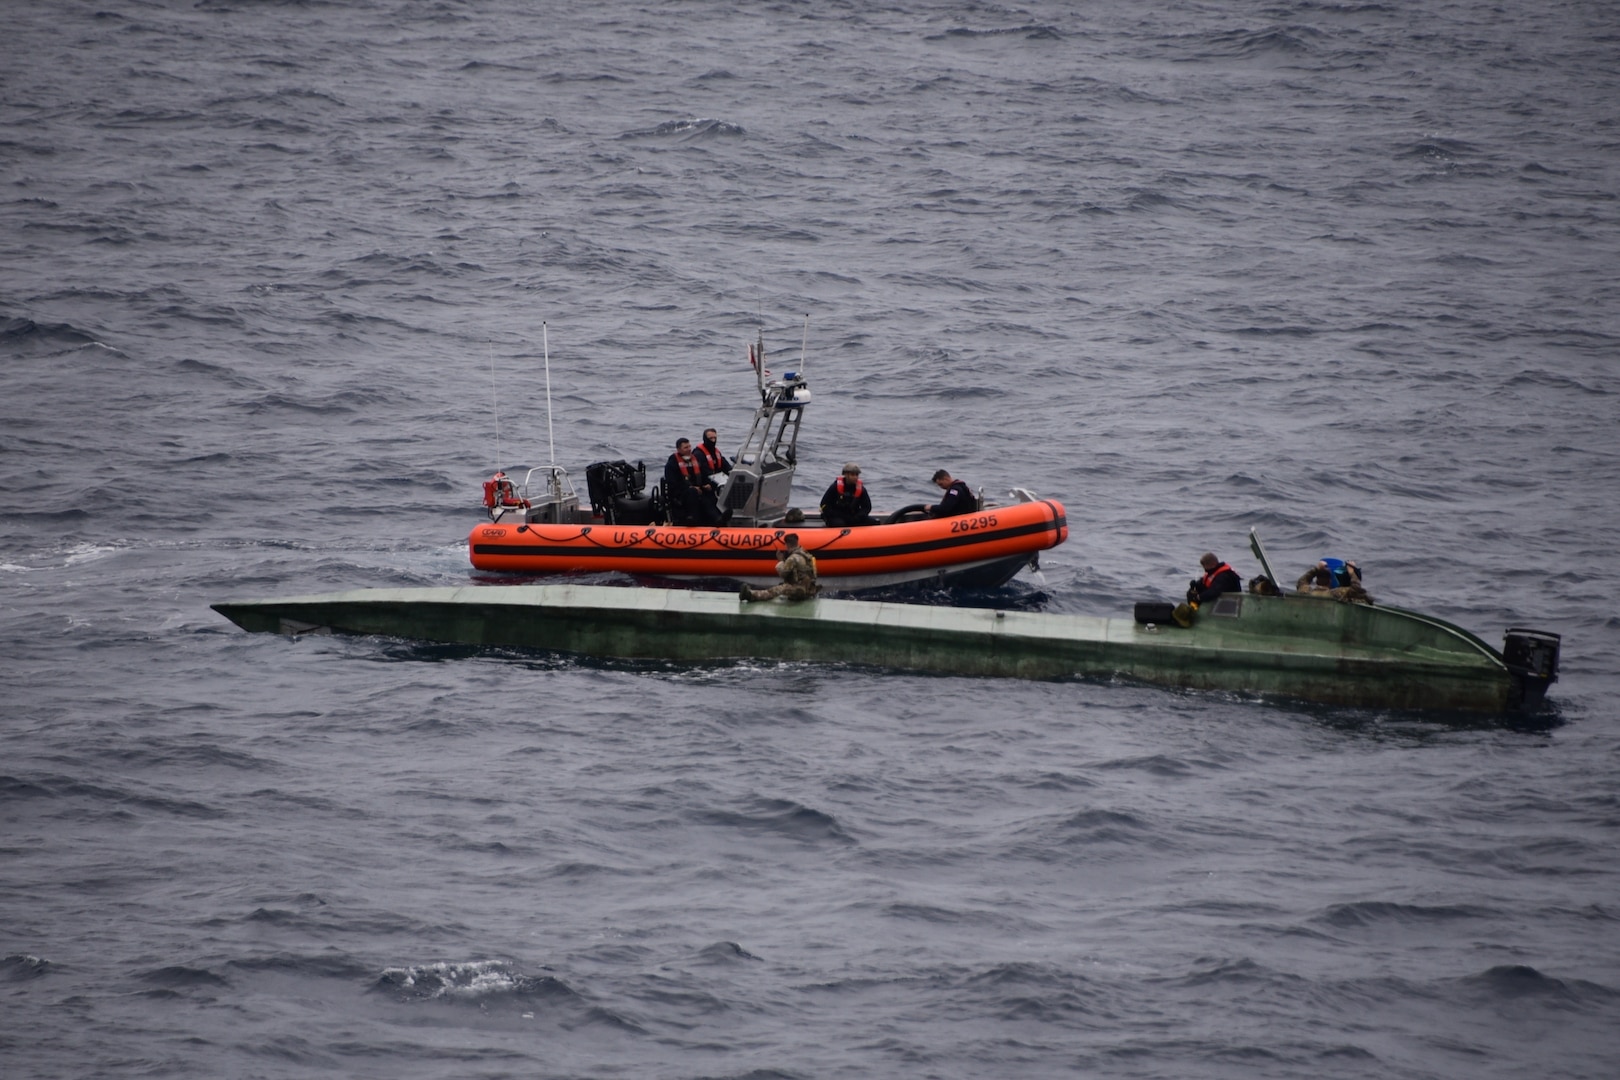 Coast Guard Cutter Bertholf (WMSL-750) crewmembers inspect a low-profile semi-submersible in international waters of the Eastern Pacific Ocean Aug. 14, 2020.